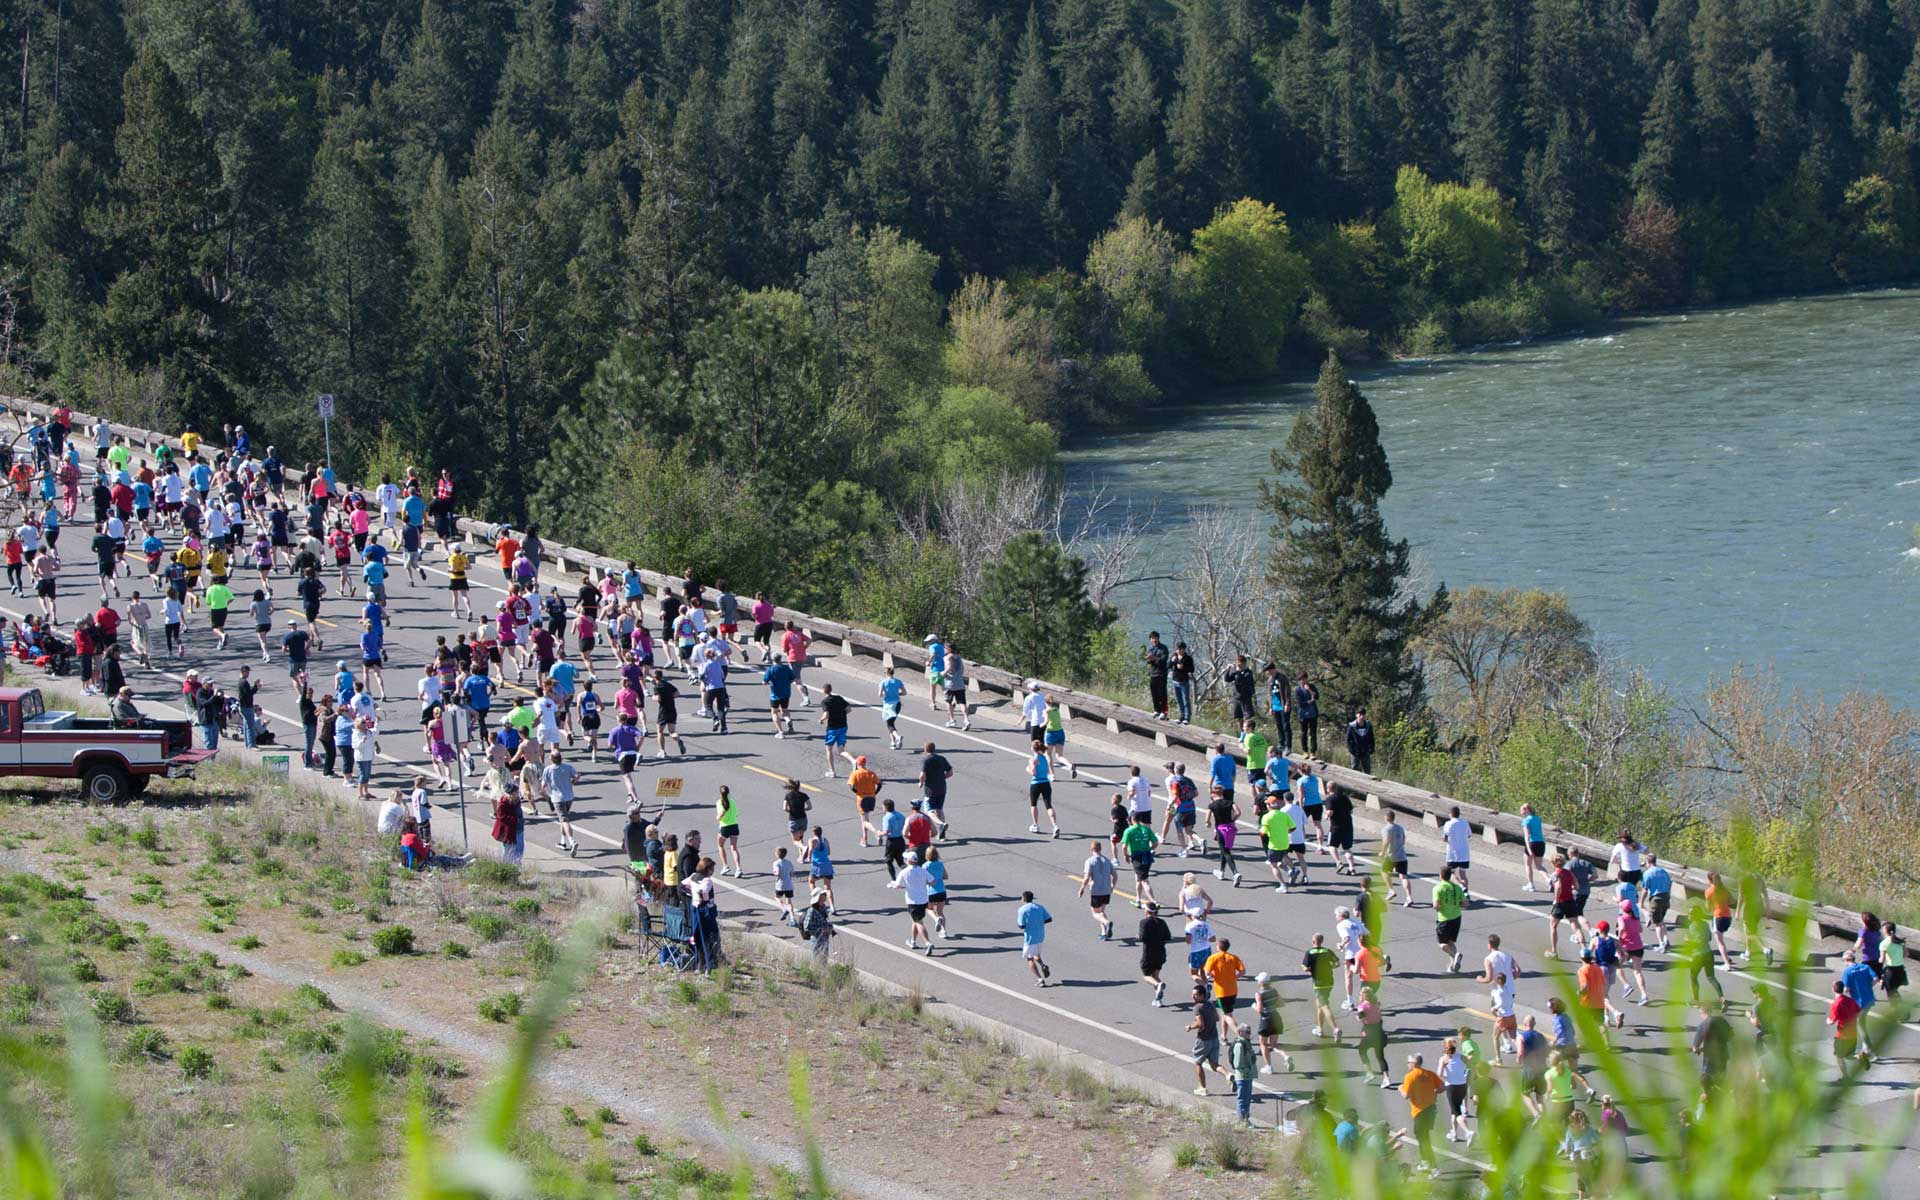 Bloomsday is this weekend! City of Spokane, Washington